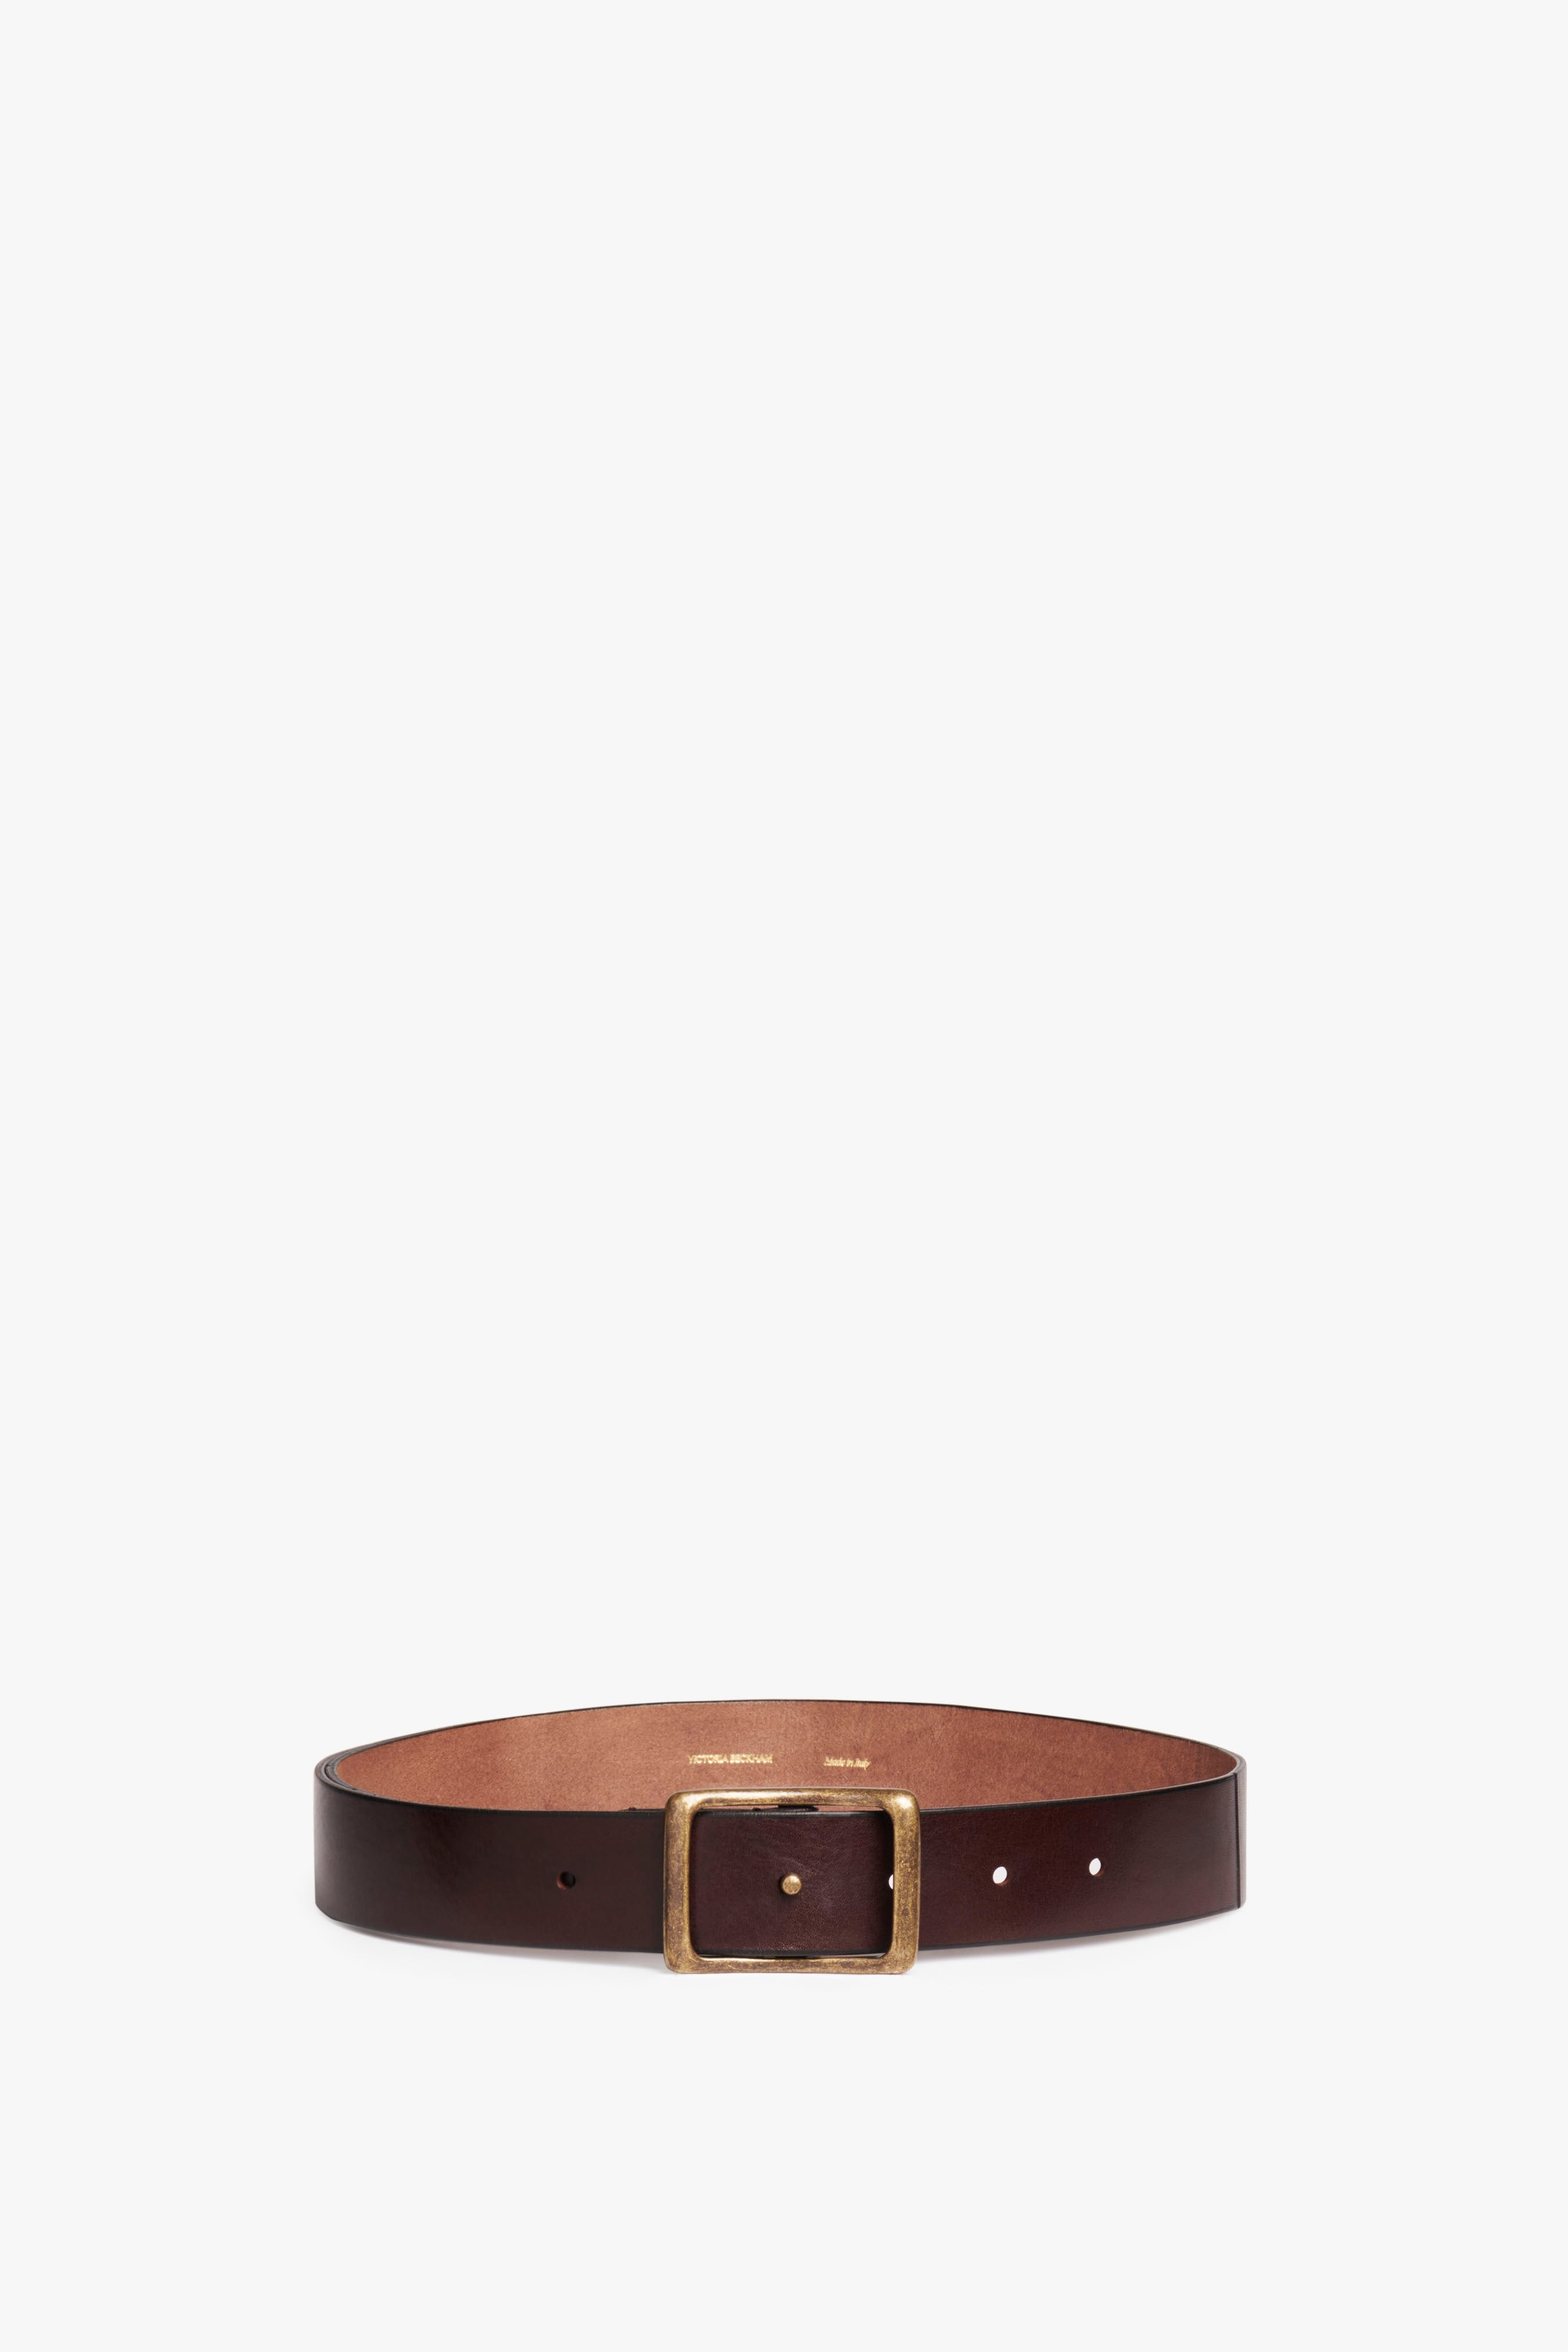 Utility Belt in Chocolate Brown - 1